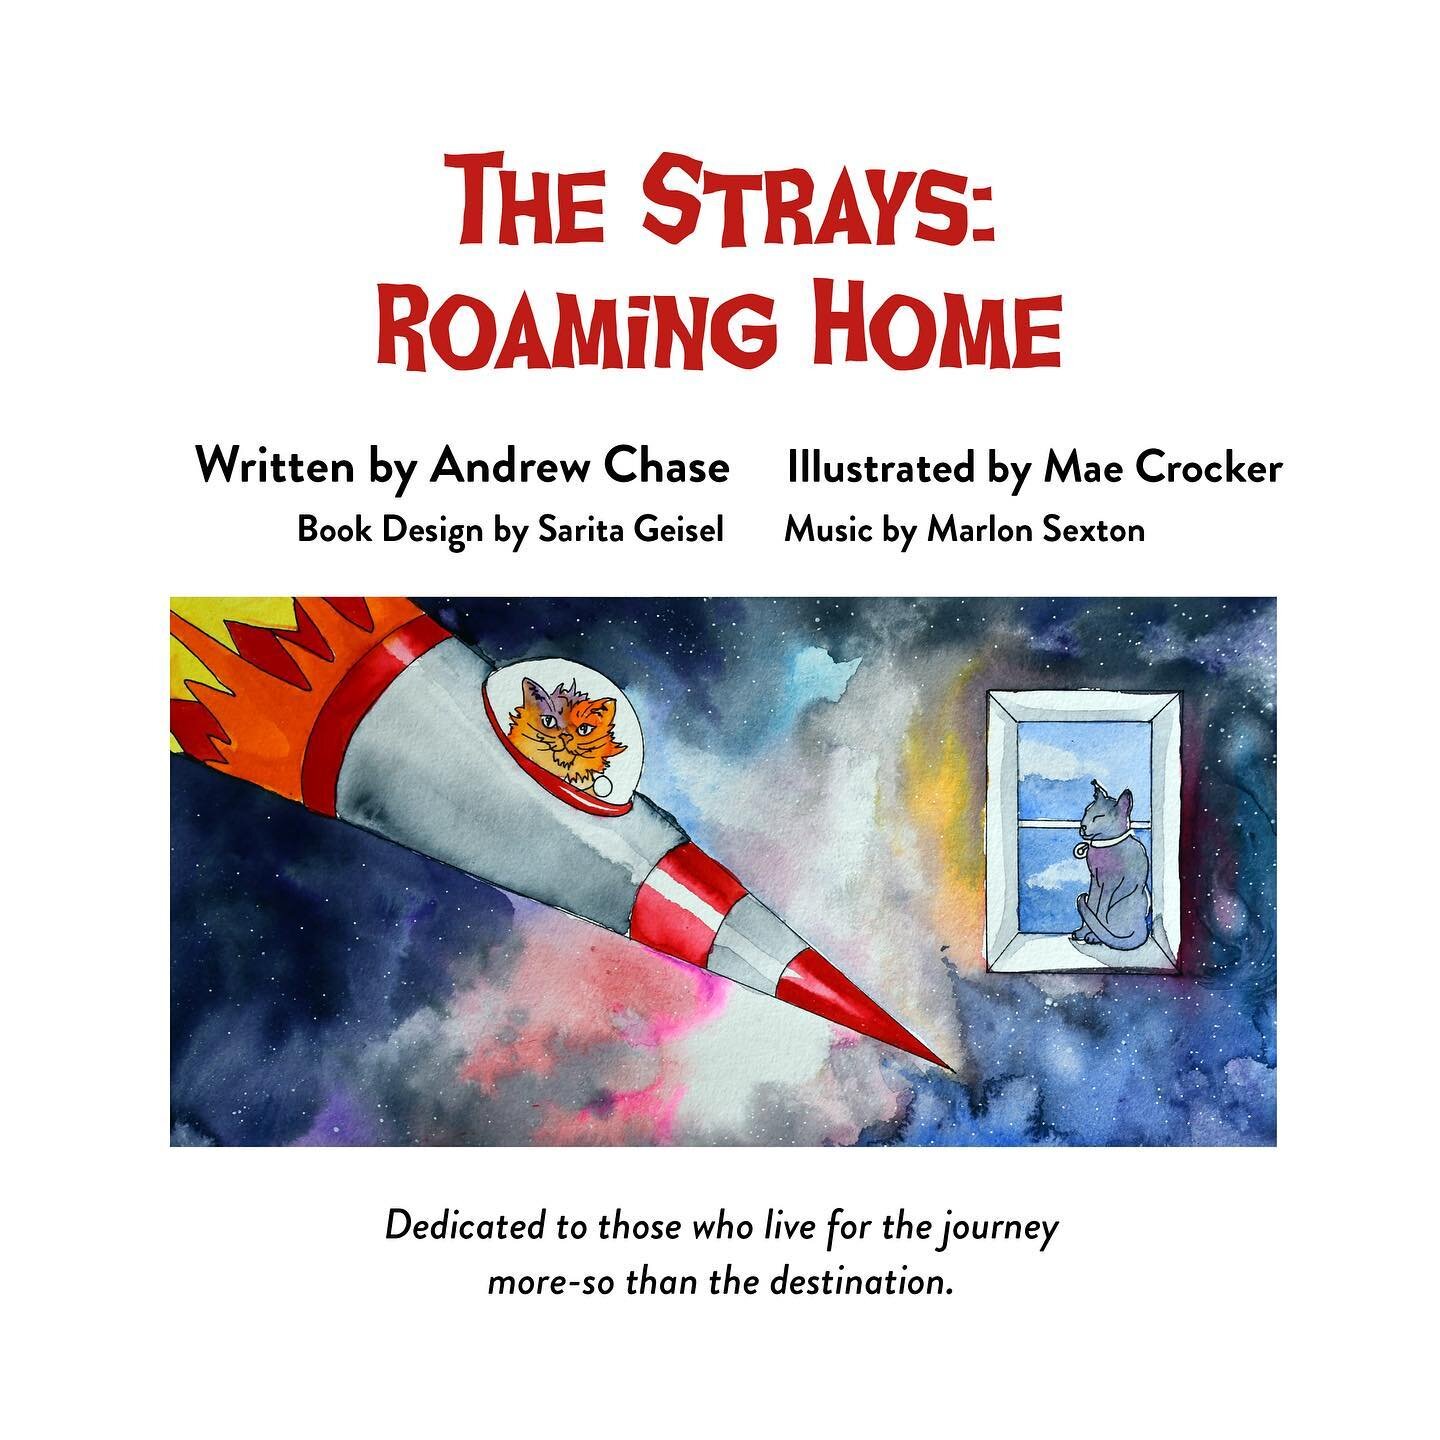 New children&rsquo;s book now available! &ldquo;The Strays: Roaming Home&rdquo; (link in bio)⁣⁣ 🐈🐈&zwj;⬛🚀🪐
⁣⁣
Written by @andychuckchase⁣⁣
Illustrated by @autumn_in_mae 
Book design by @saritageisel_design 
Music by @mc_sexton 
⁣⁣
This project is